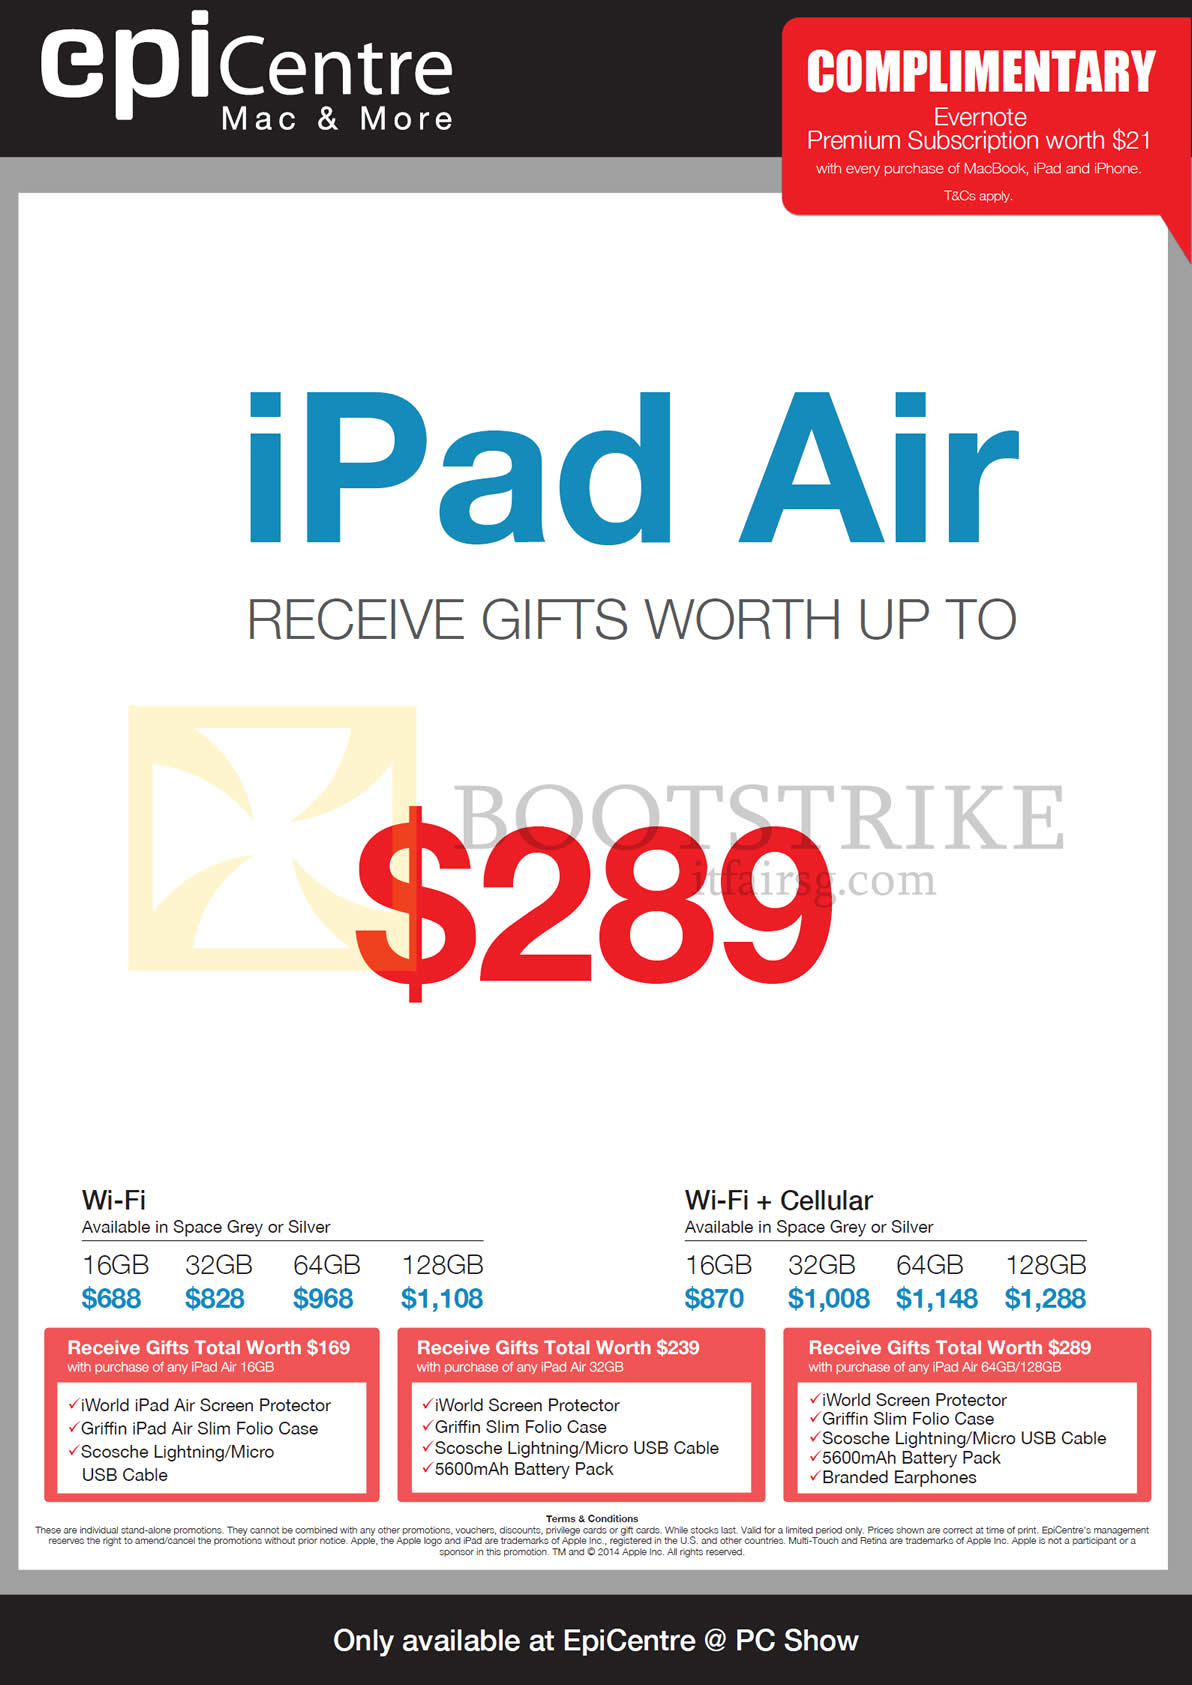 PC SHOW 2014 price list image brochure of EpiCentre Apple IPad Air, Wi-Fi, Cellular